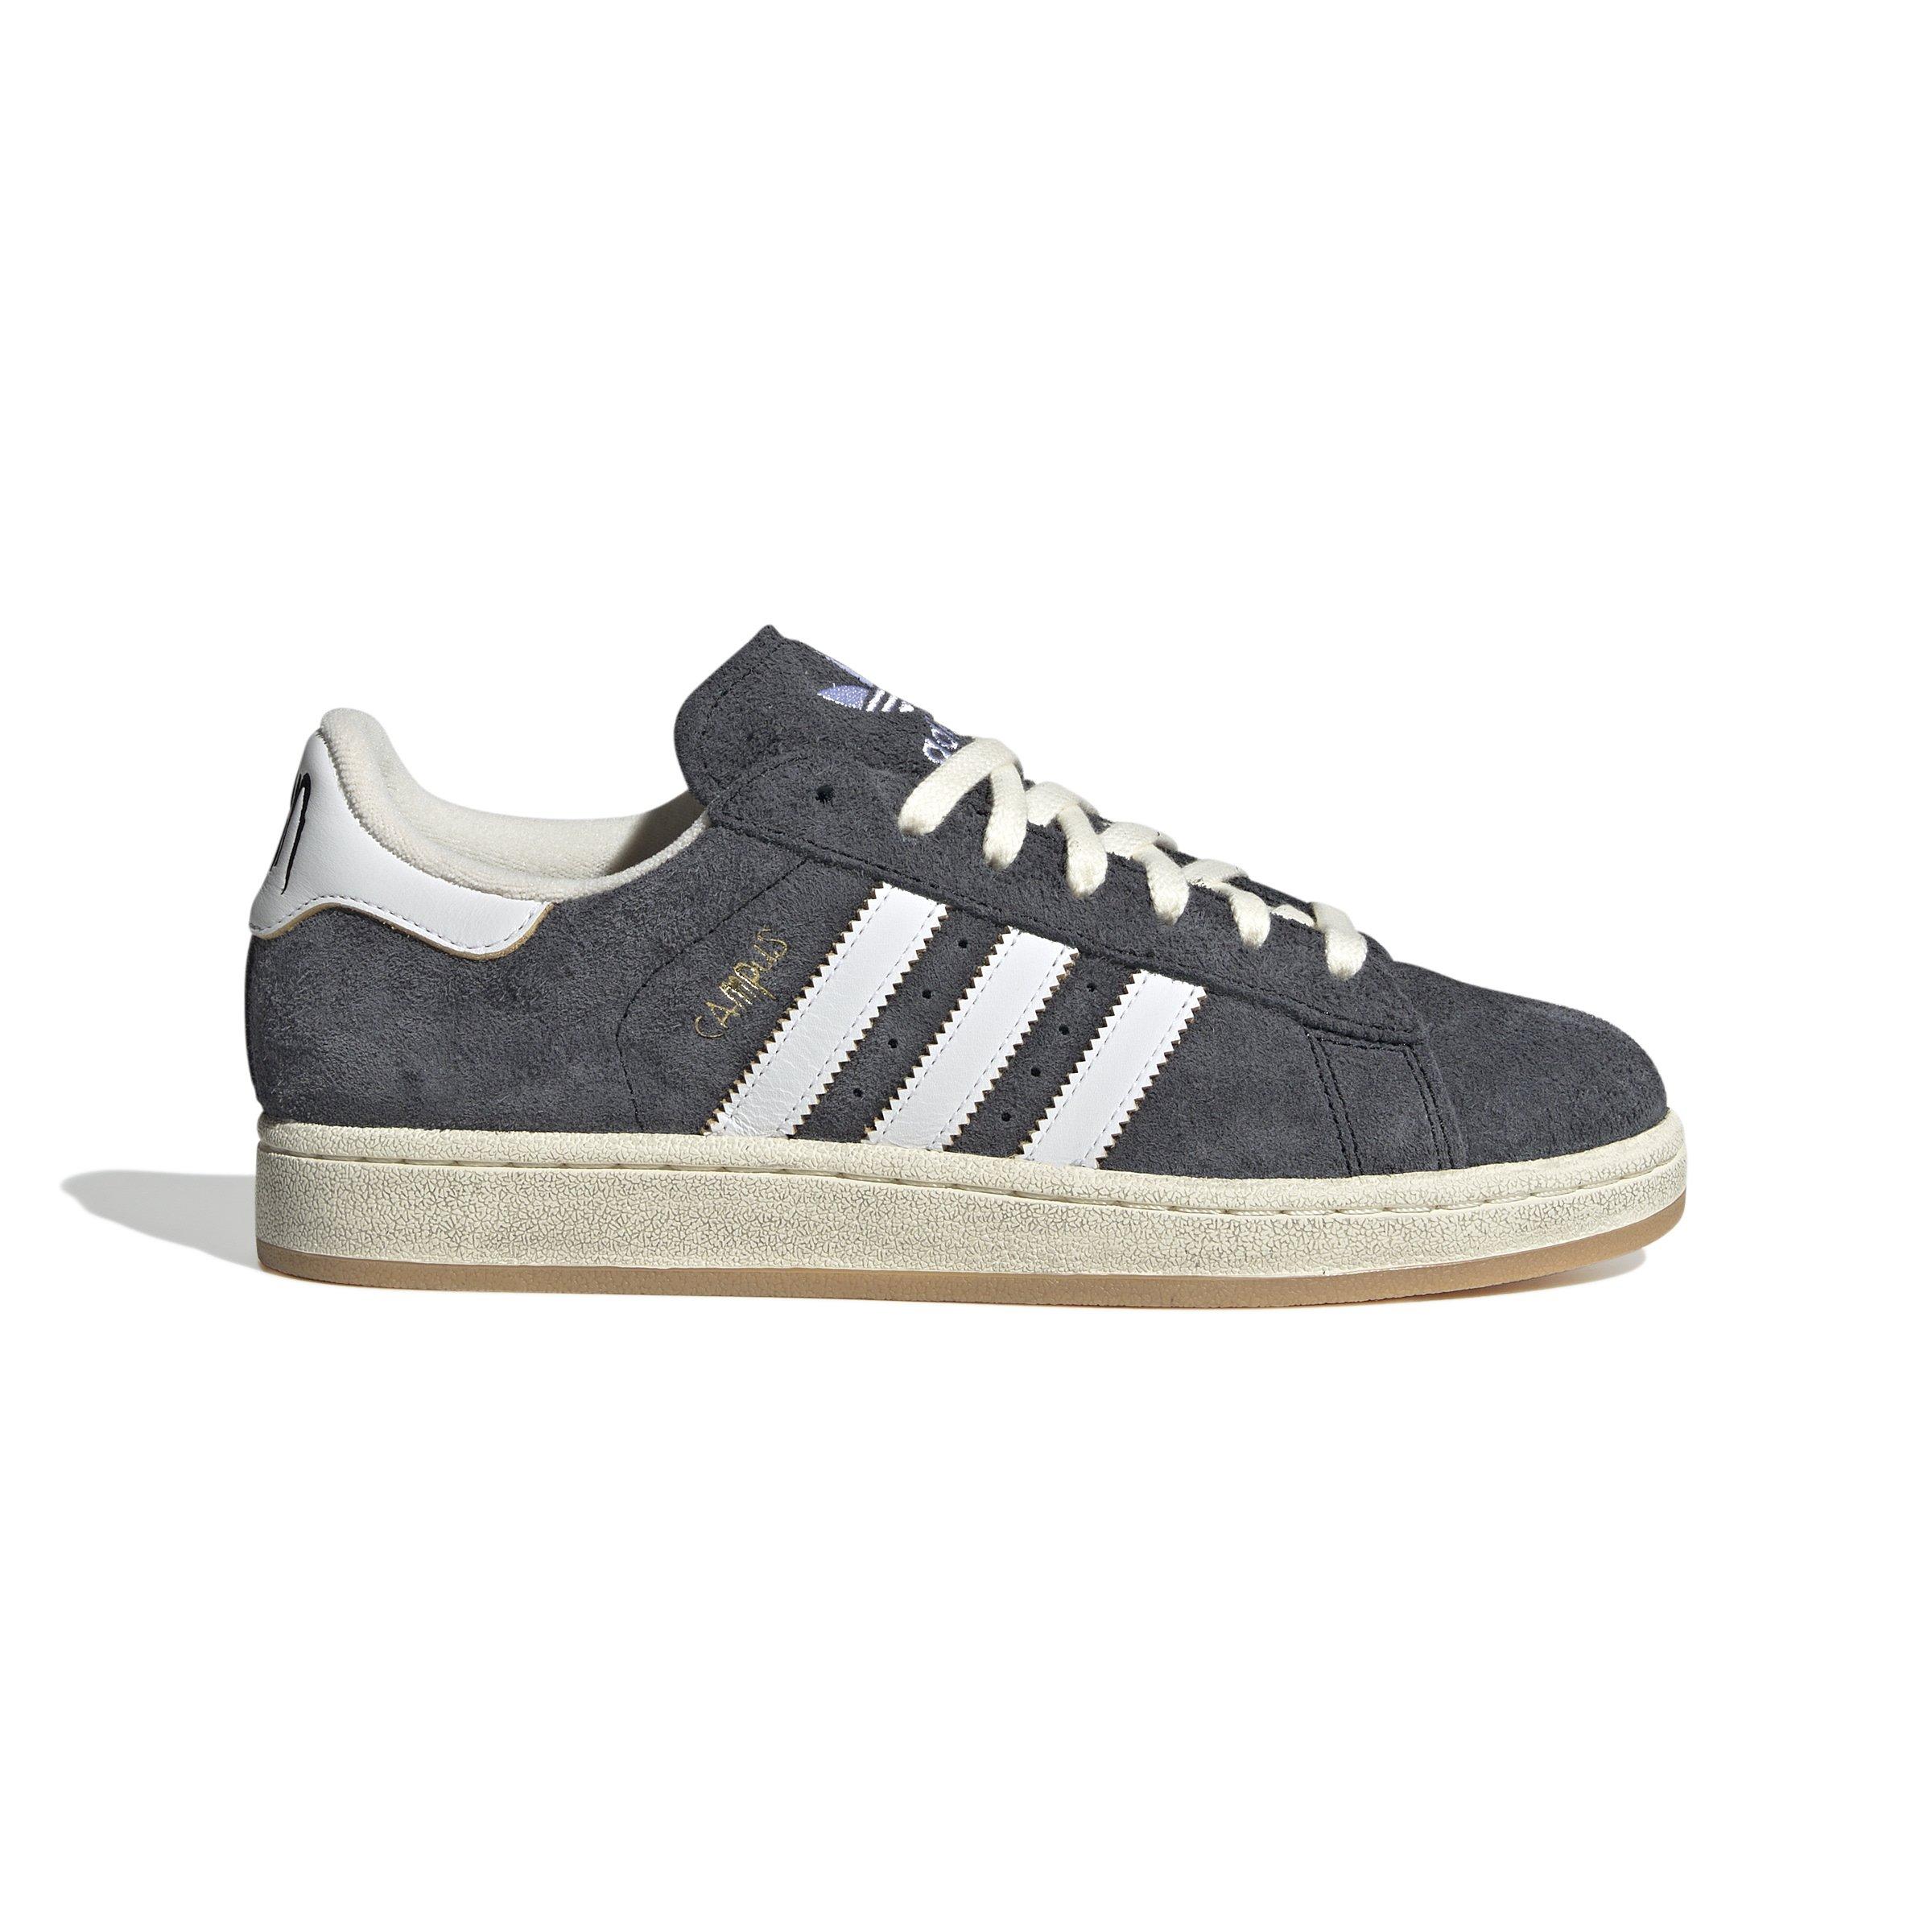 Adidas Korn Campus 2.0 Mens Lifestyle Shoes (Carbon/Off White)